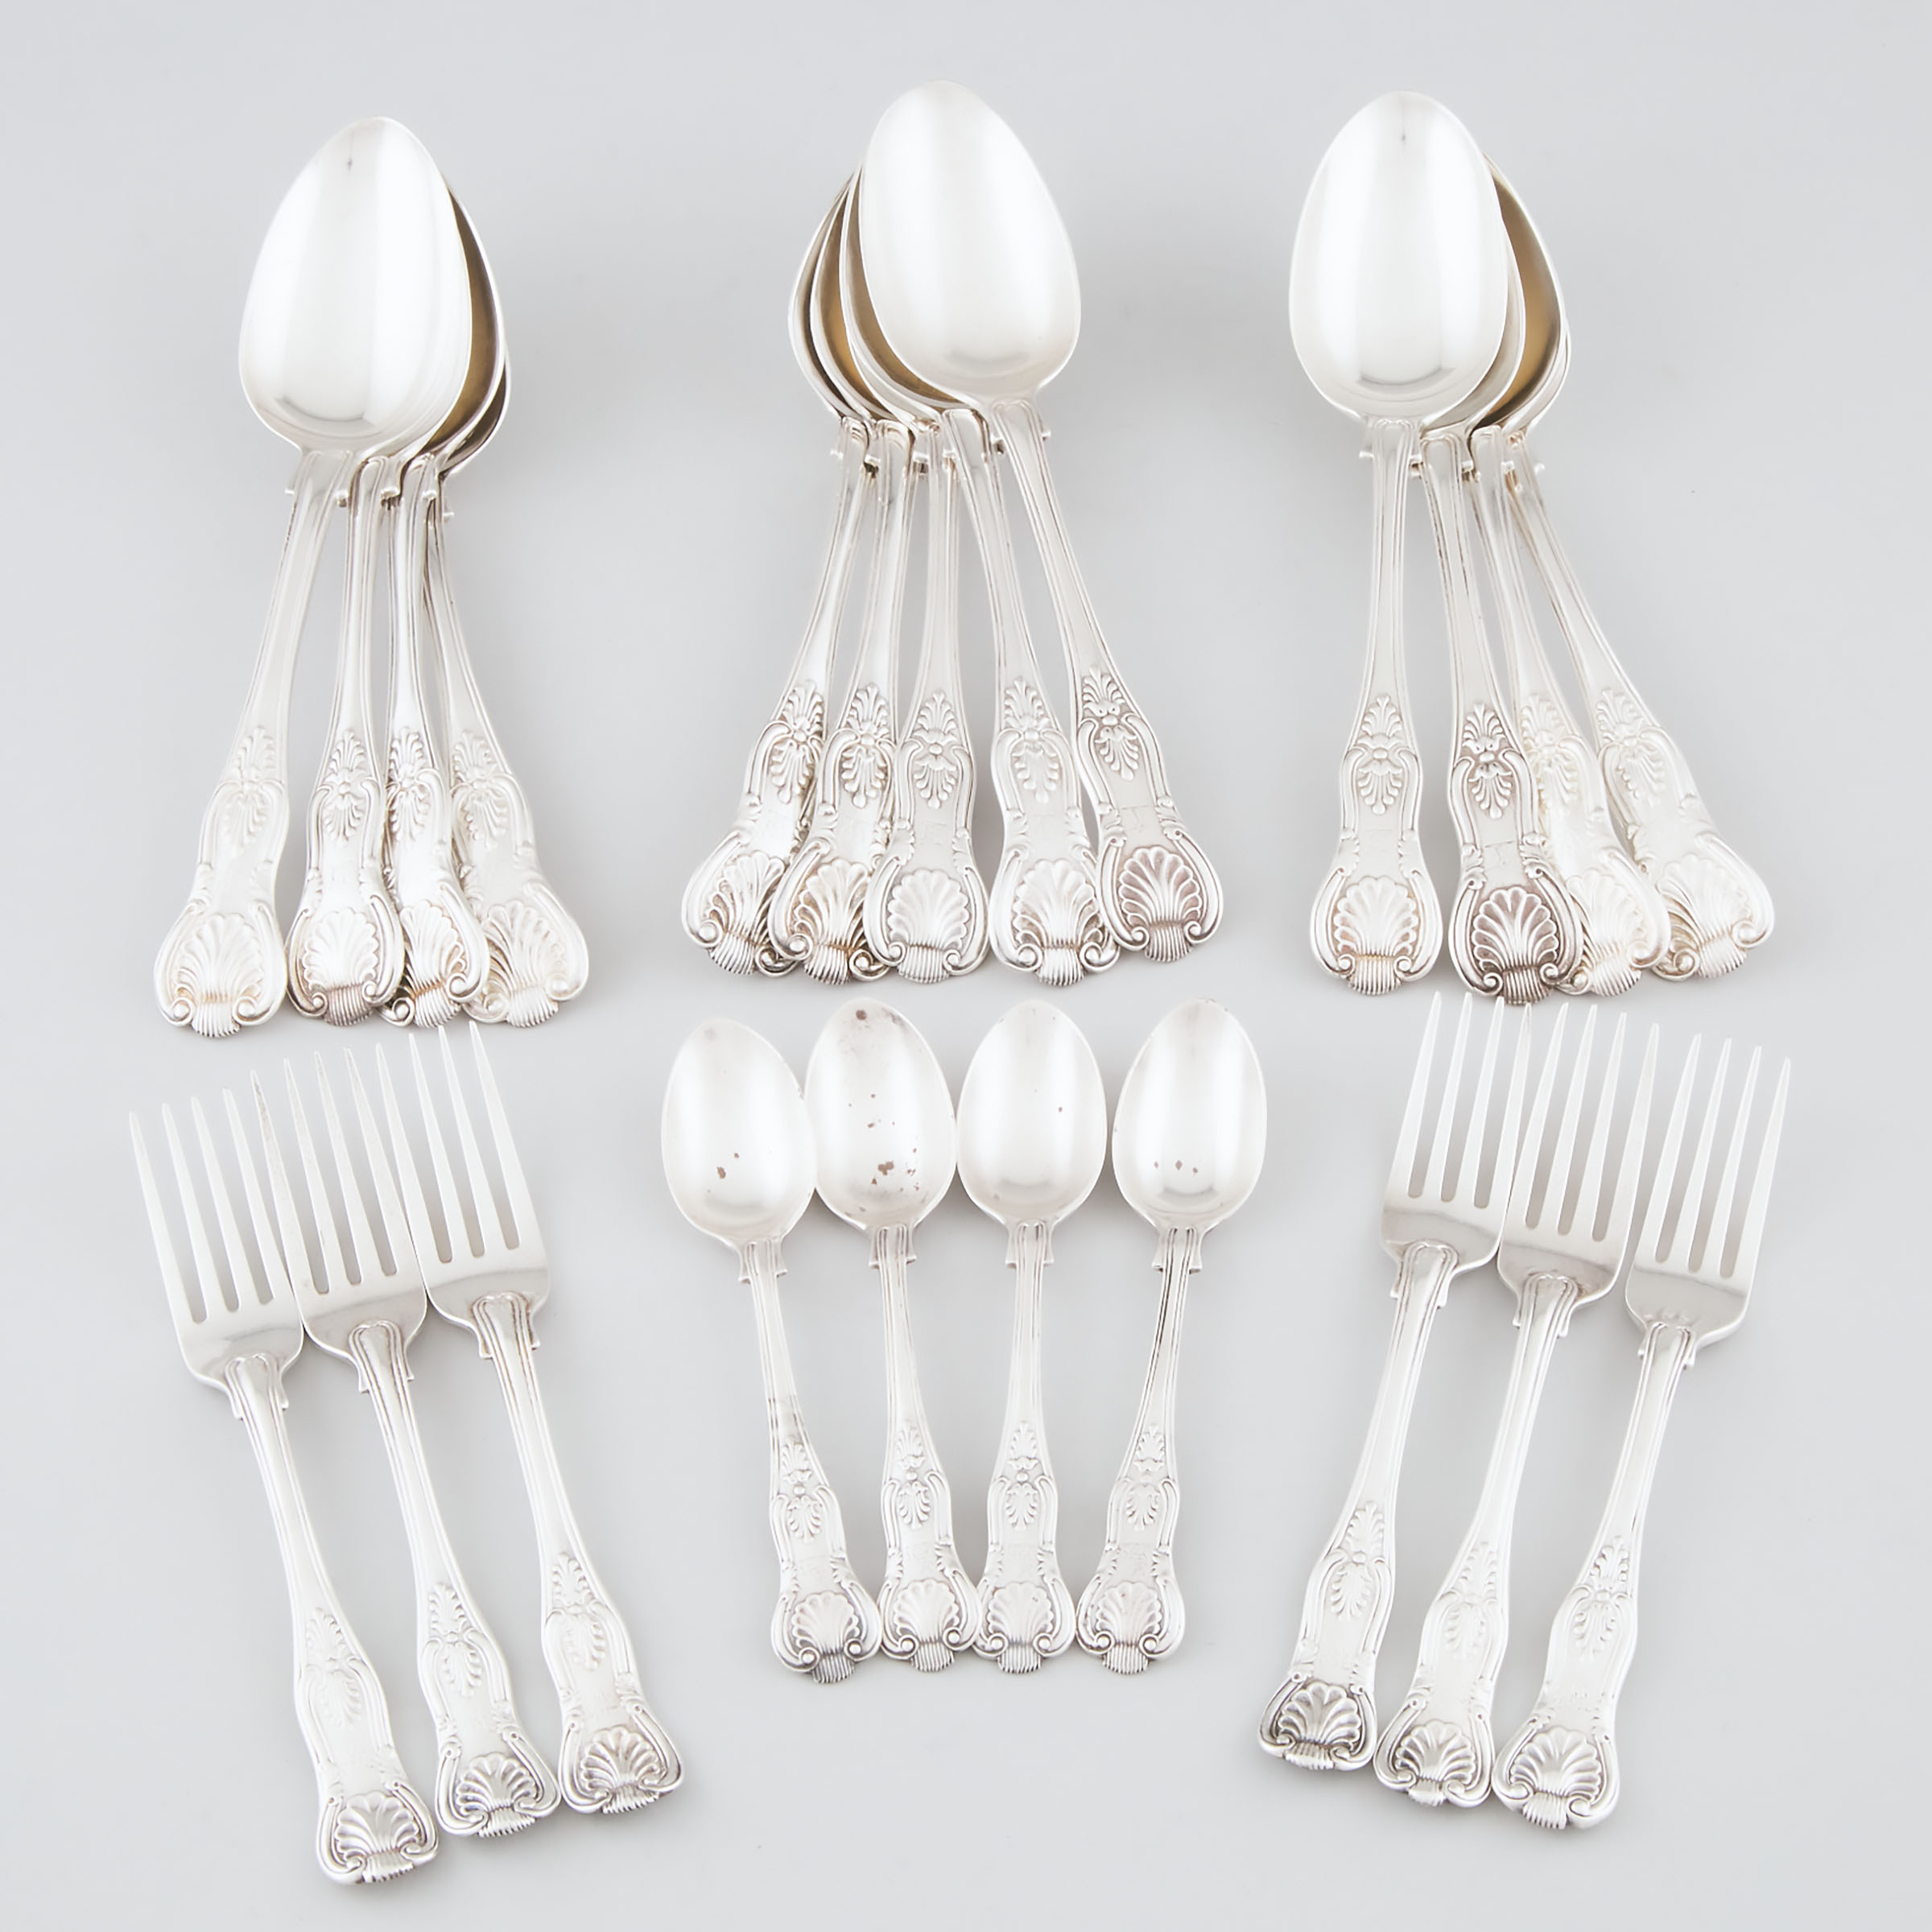 Thirteen Victorian Silver Kings Pattern Table Spoons, Six Dessert Forks and Four Tea Spoons, London, c.1836-1900 